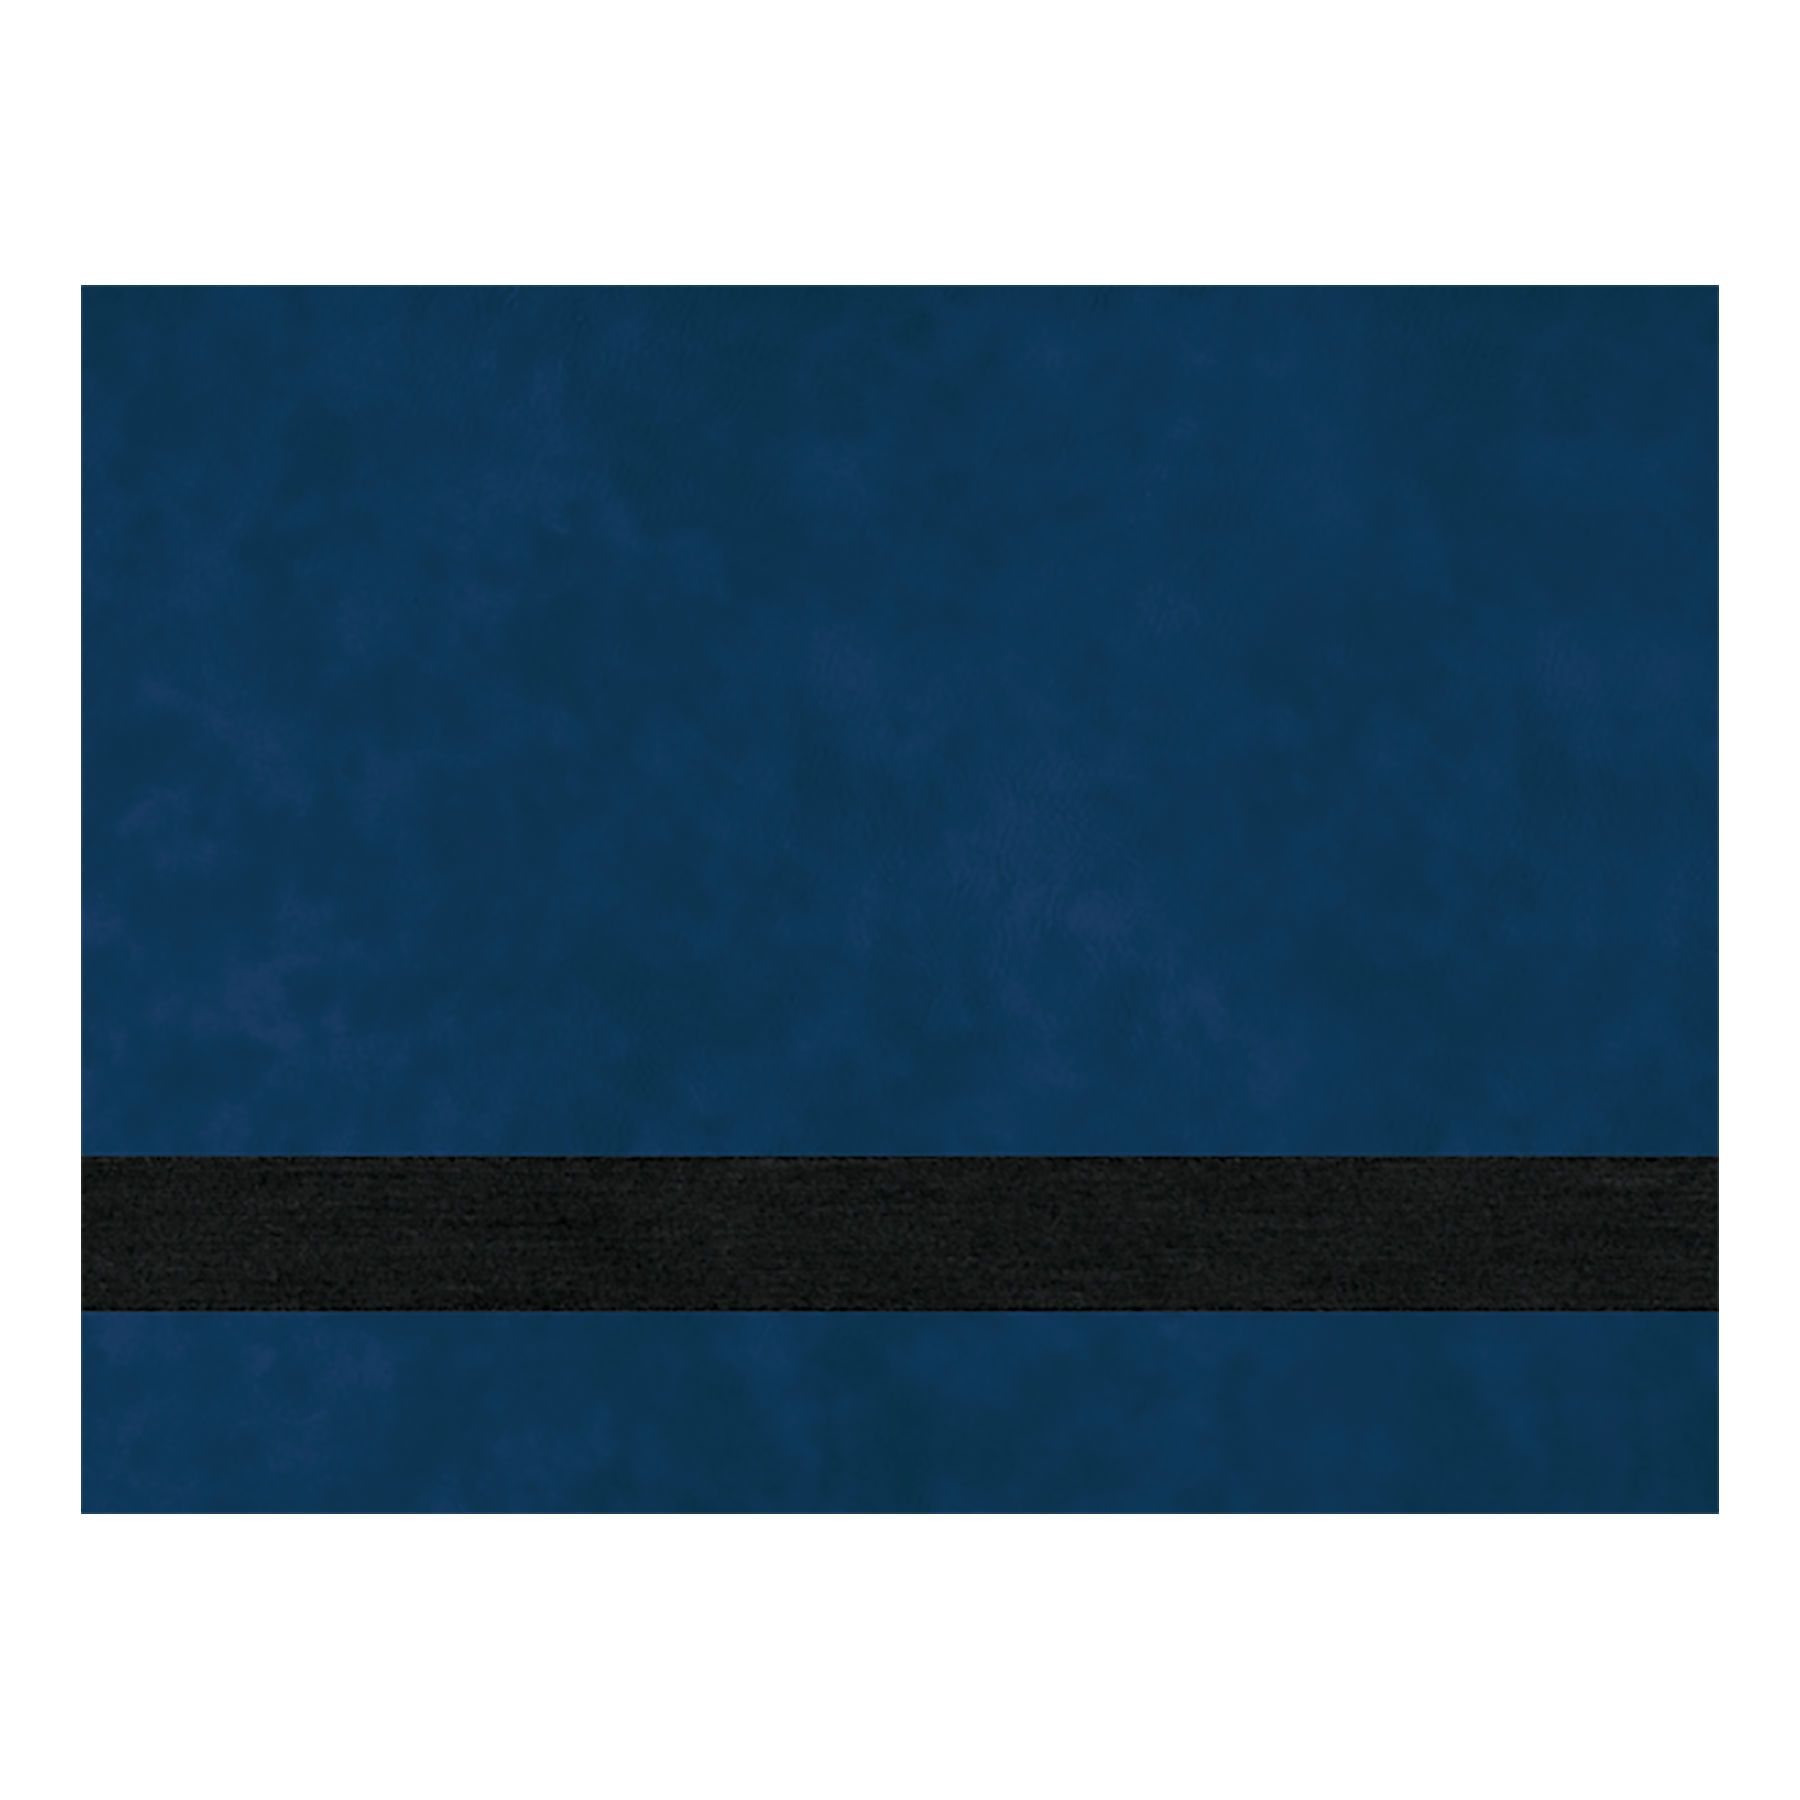 PRE-ORDER! Full Size Laserable Leatherette Sheet Stock, Omtech Laser Engravers (Available Jan. 2022) Engraving Supplies Craftworks NW 24x16 (24" x 16") Blue/Black 